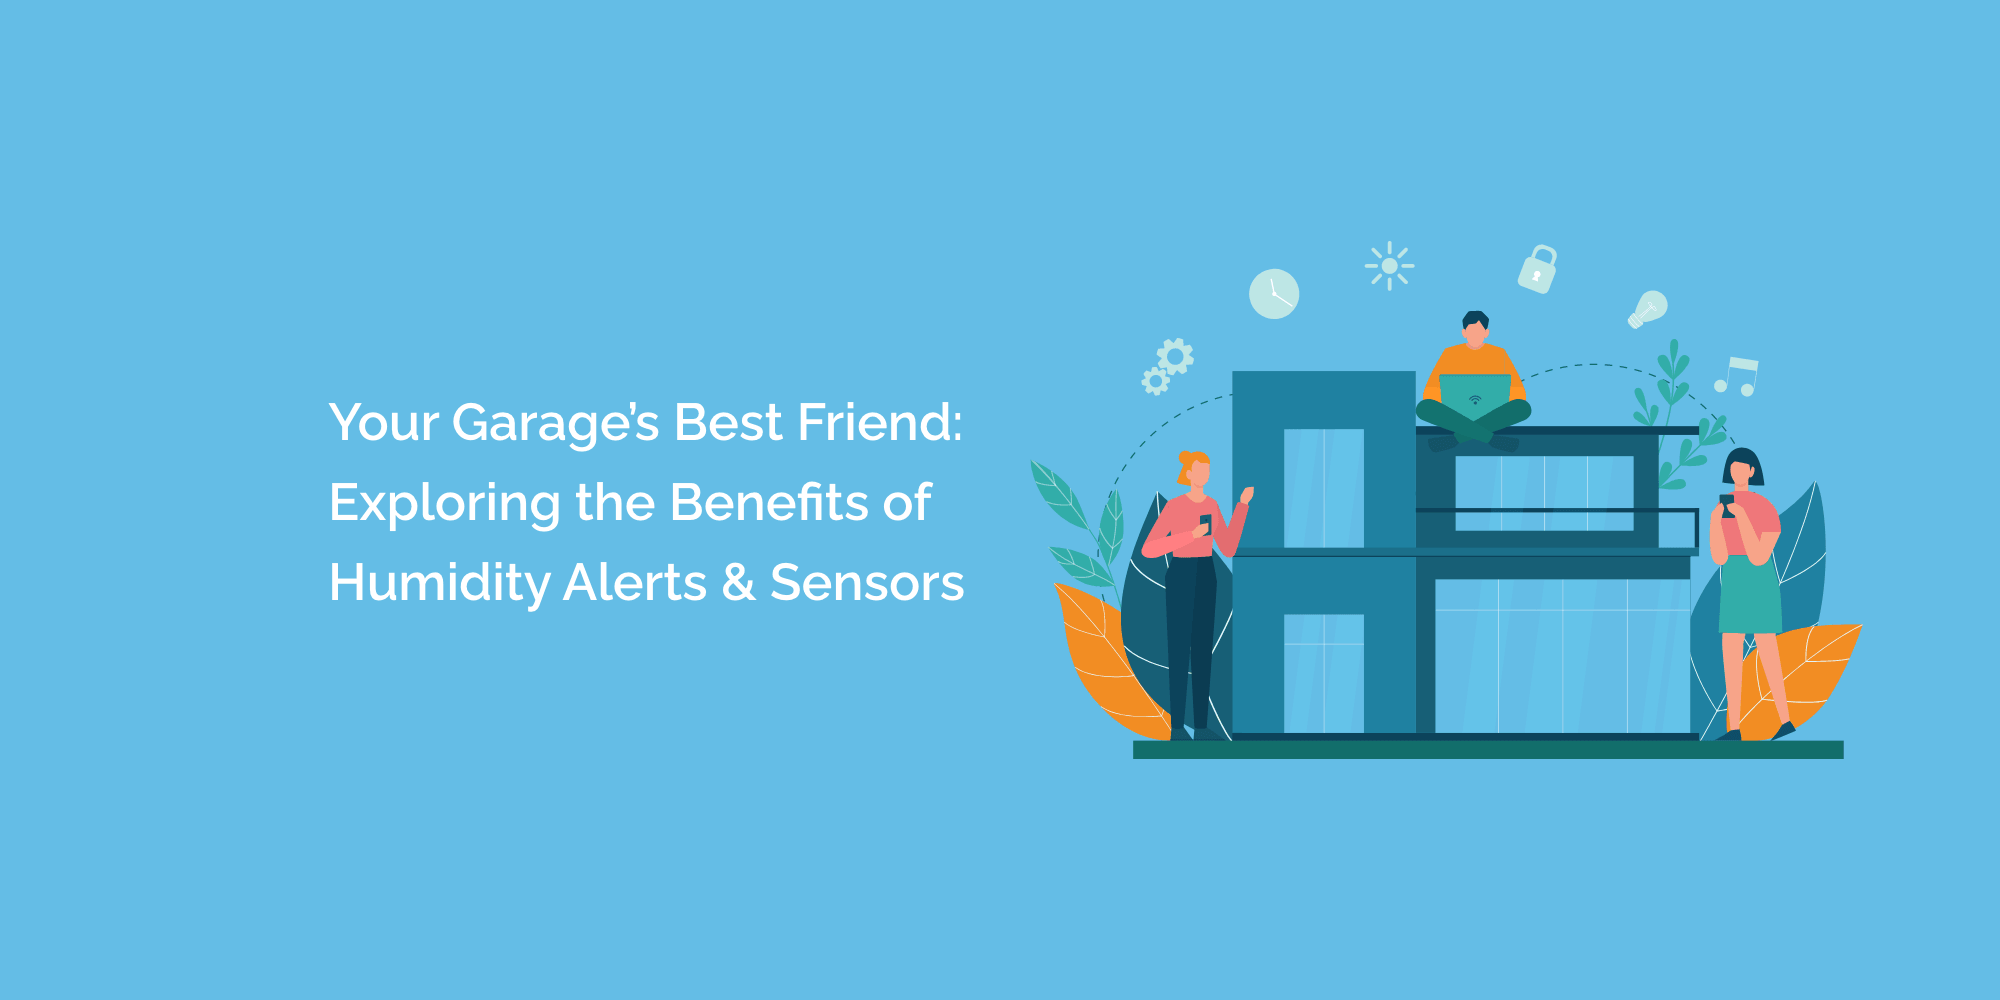 Your Garage's Best Friend: Exploring the Benefits of Humidity Alerts and Sensors